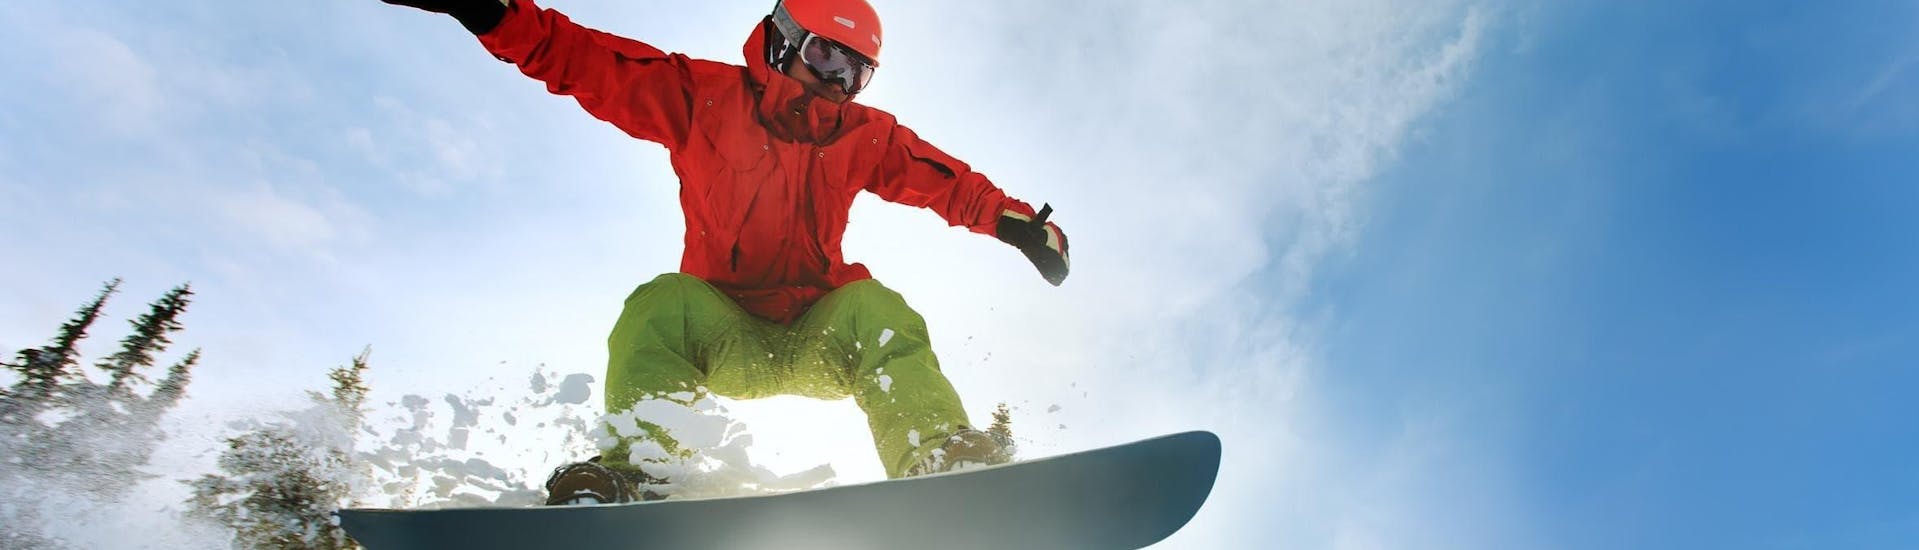 private-freestyle-snowboarding-lessons-adrenaline-verbier-hero